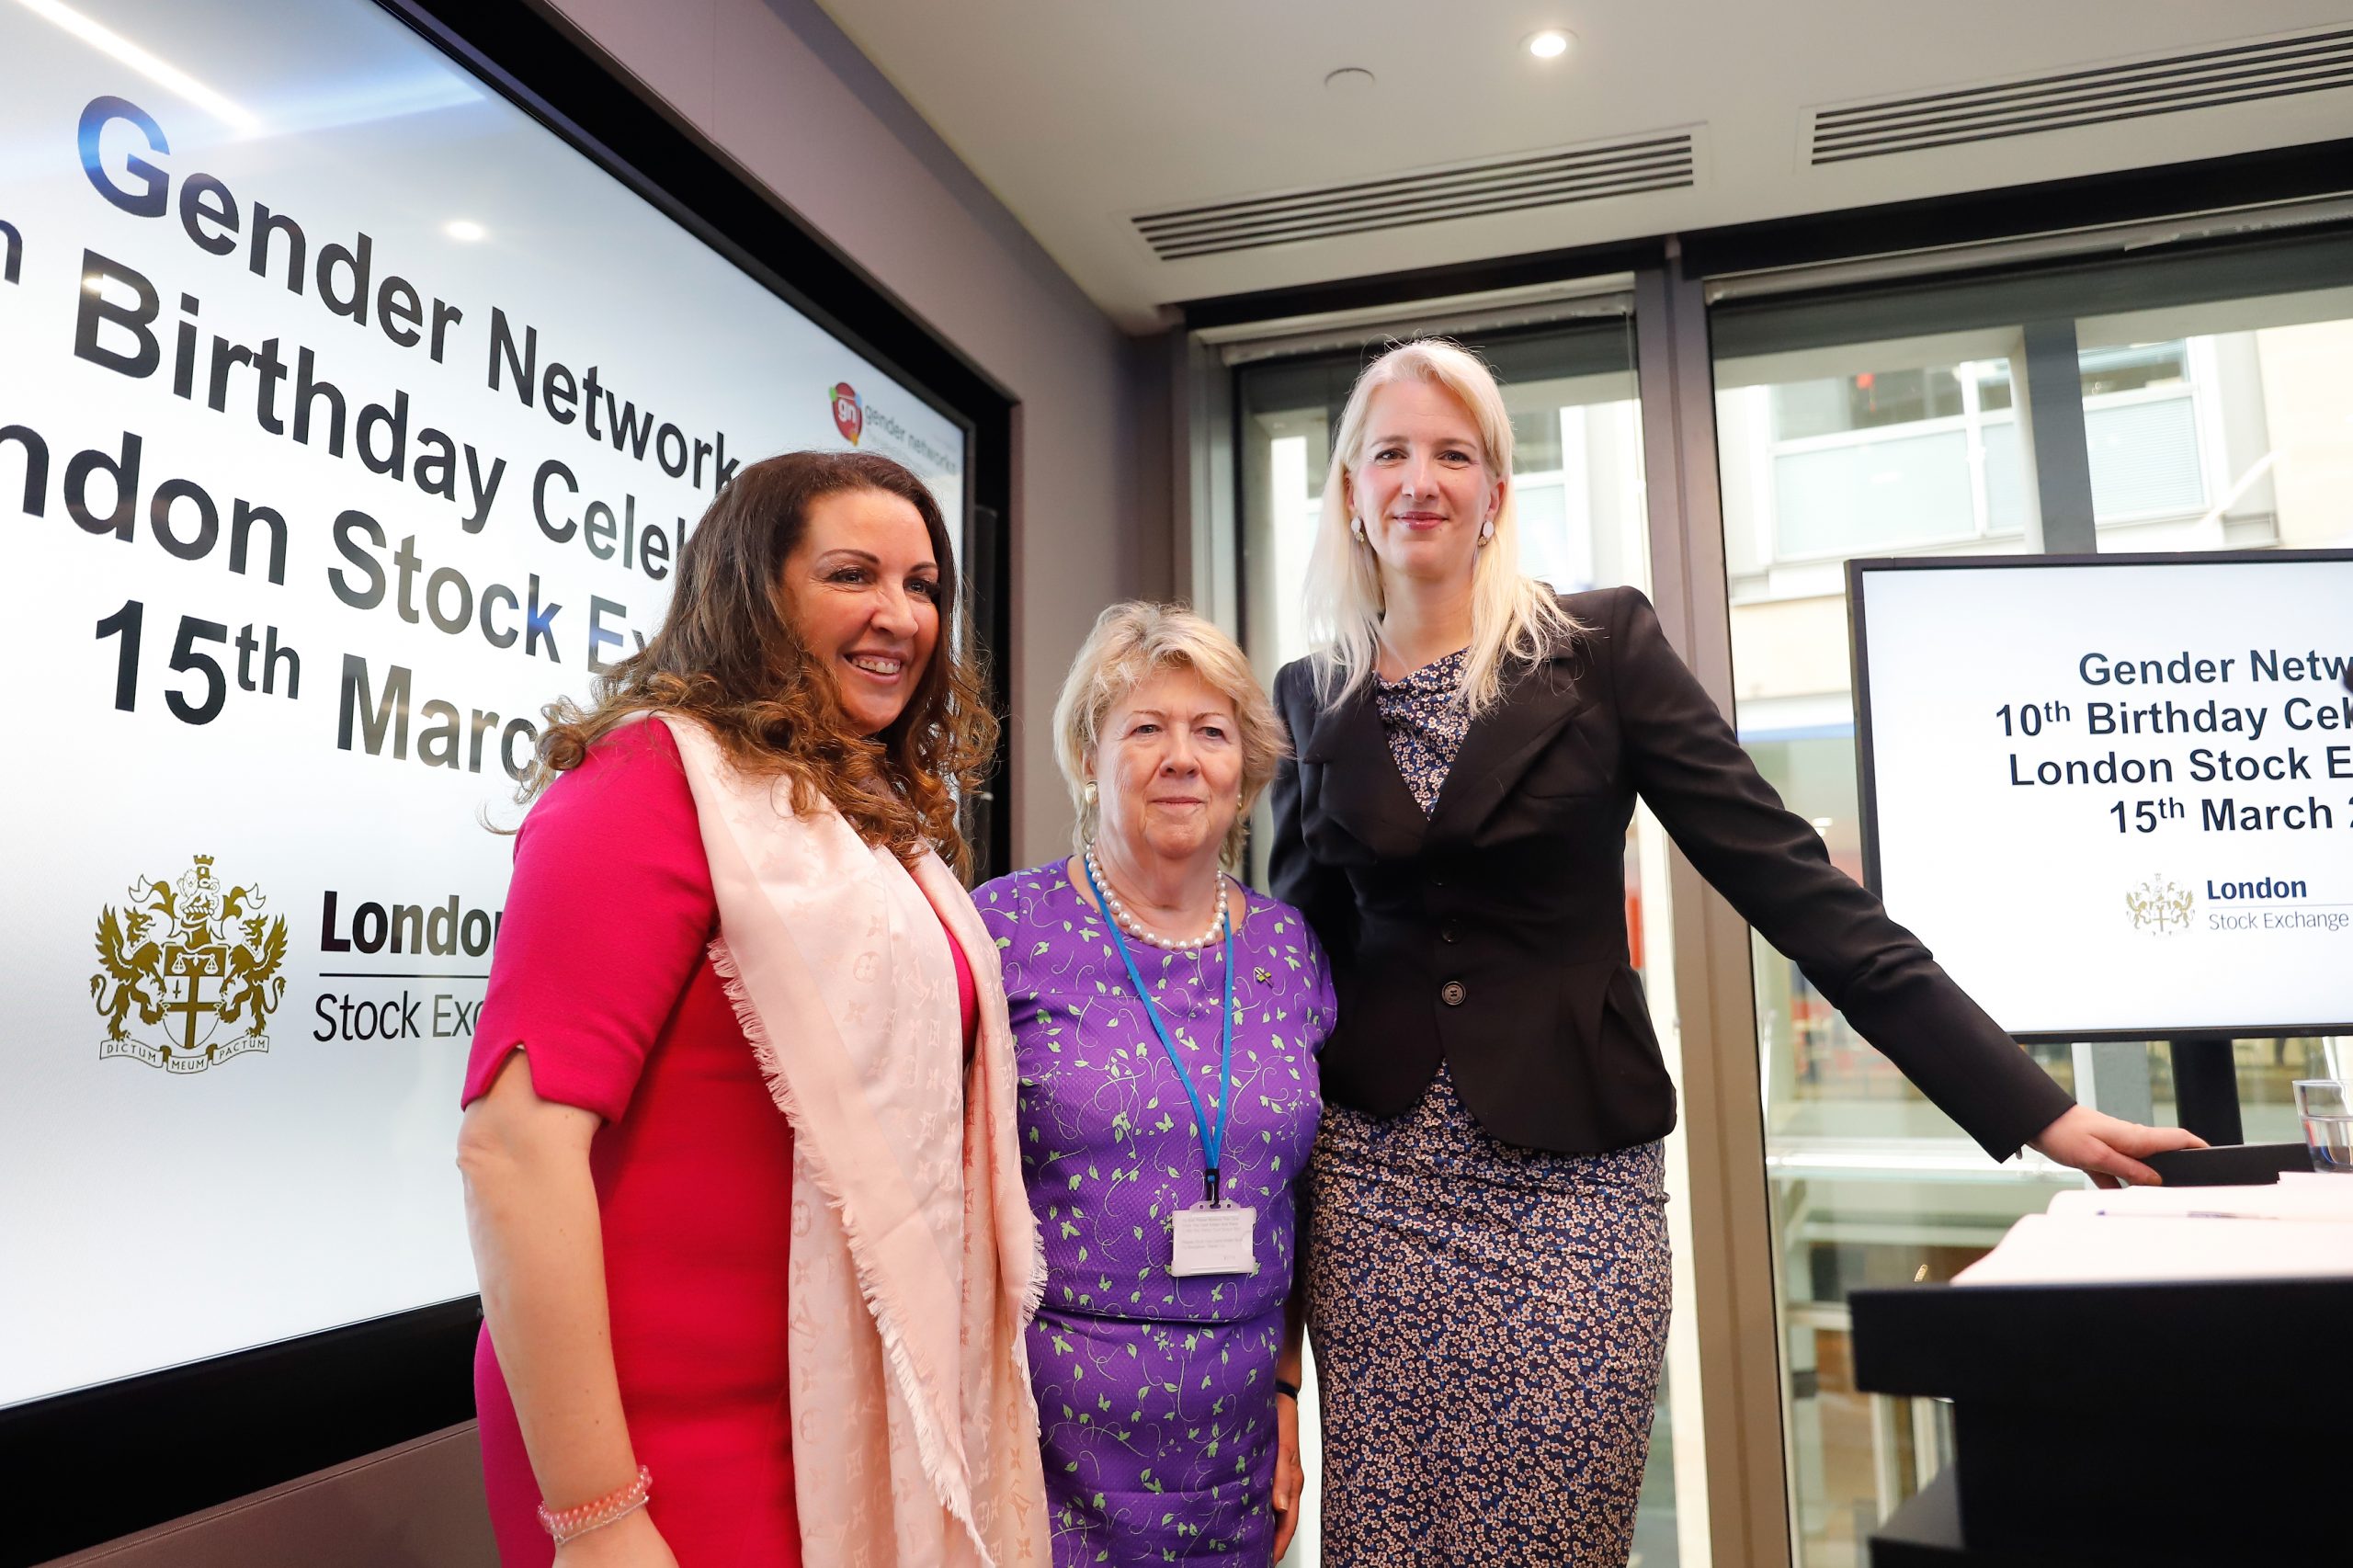 Images from the WATC Gender Networks 10th Anniversary - London Stock Exchange 15MAR19